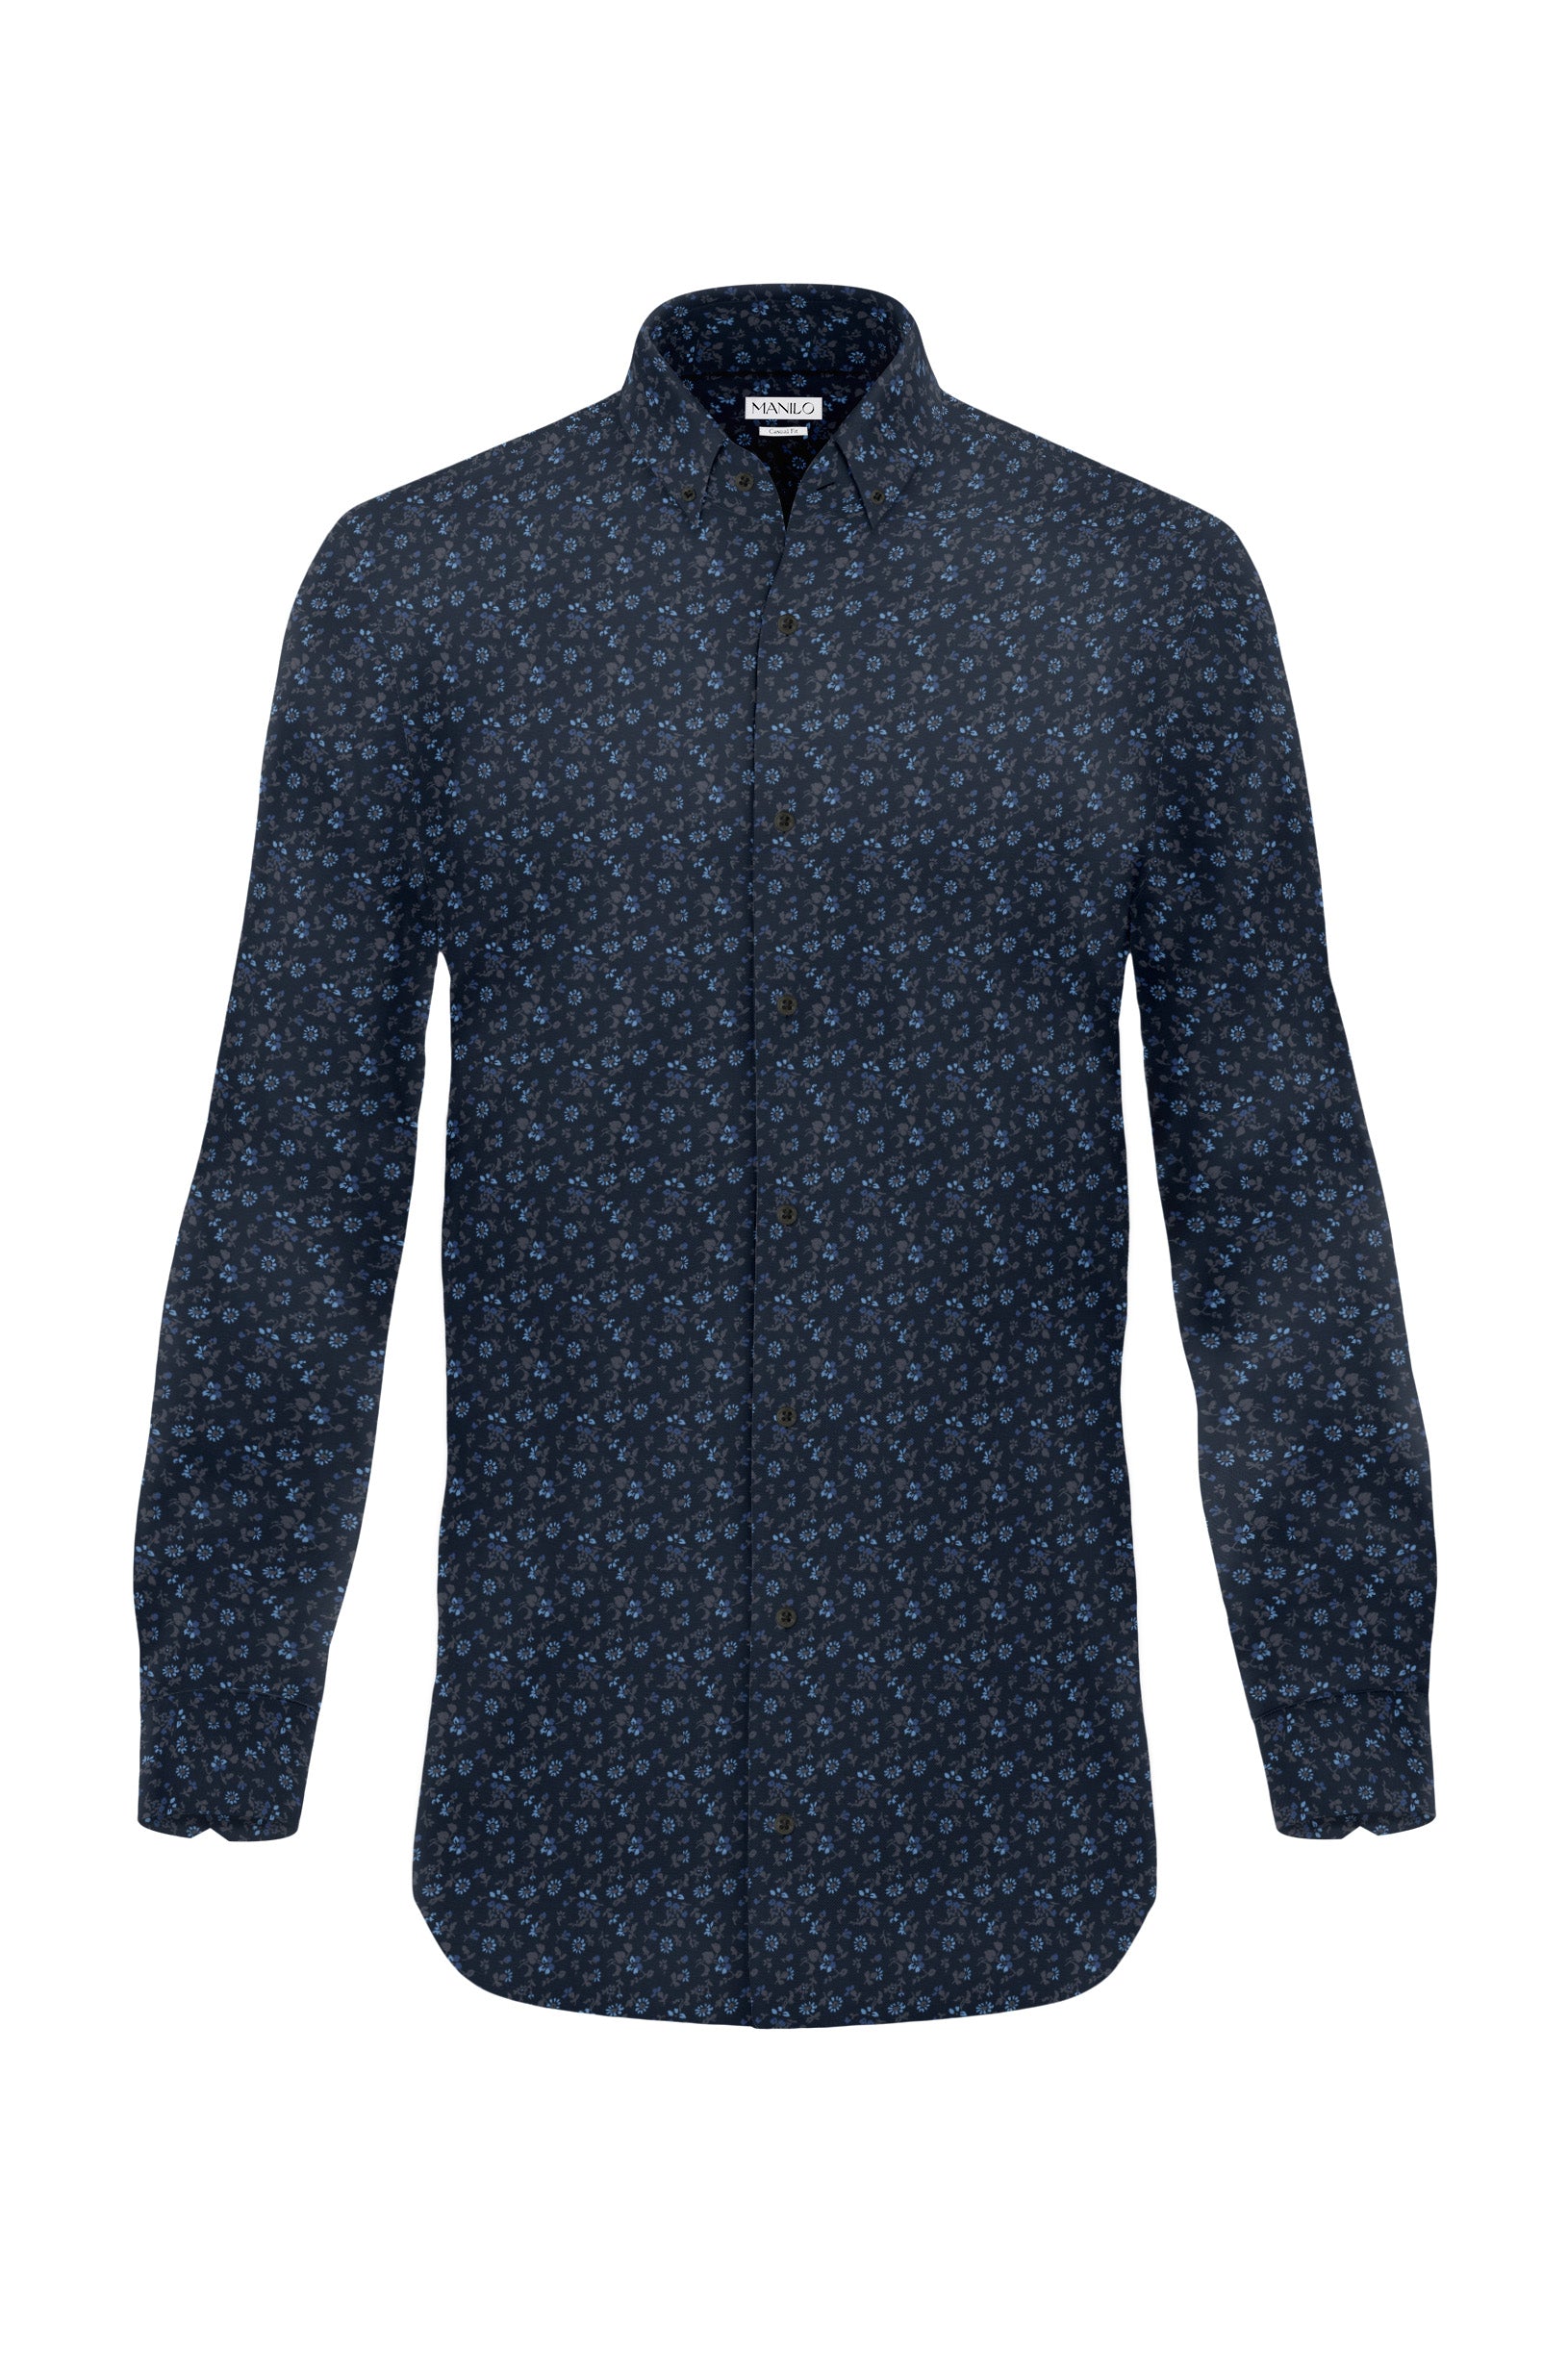 Printed casual shirt with floral pattern in night blue (Art. 2101-C)